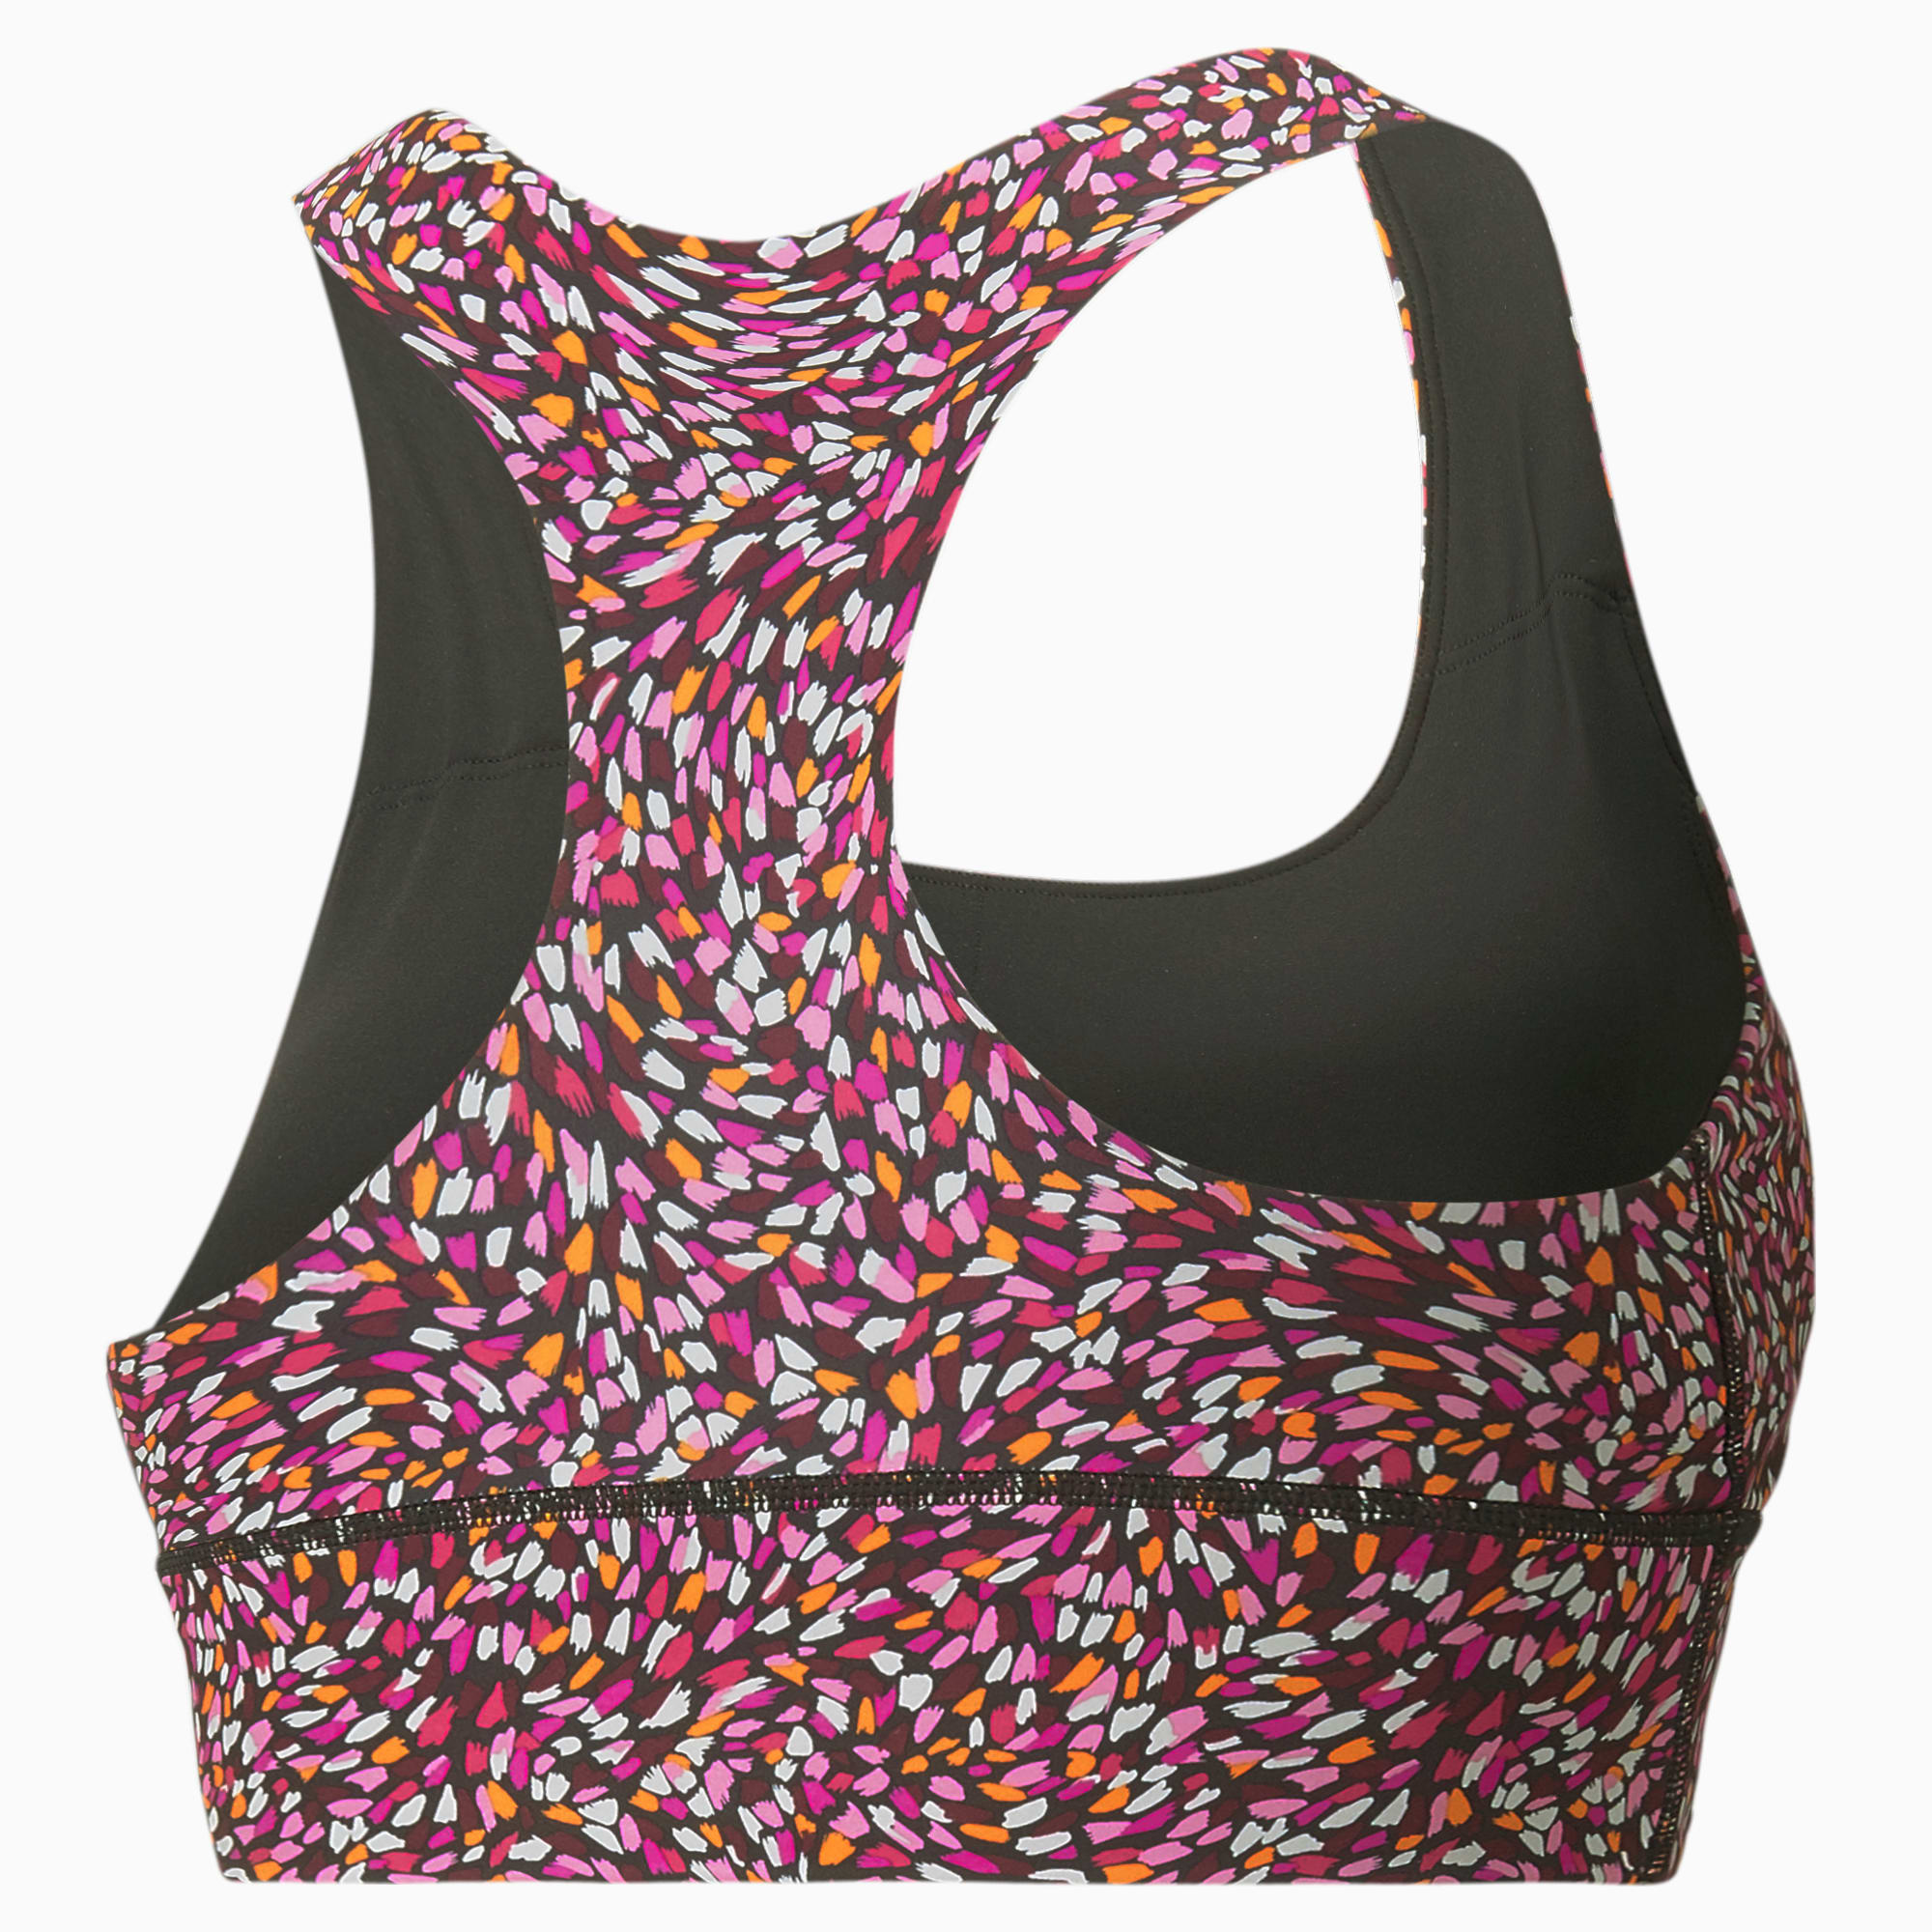 Forever Luxe Graphic Women's Sports Bra